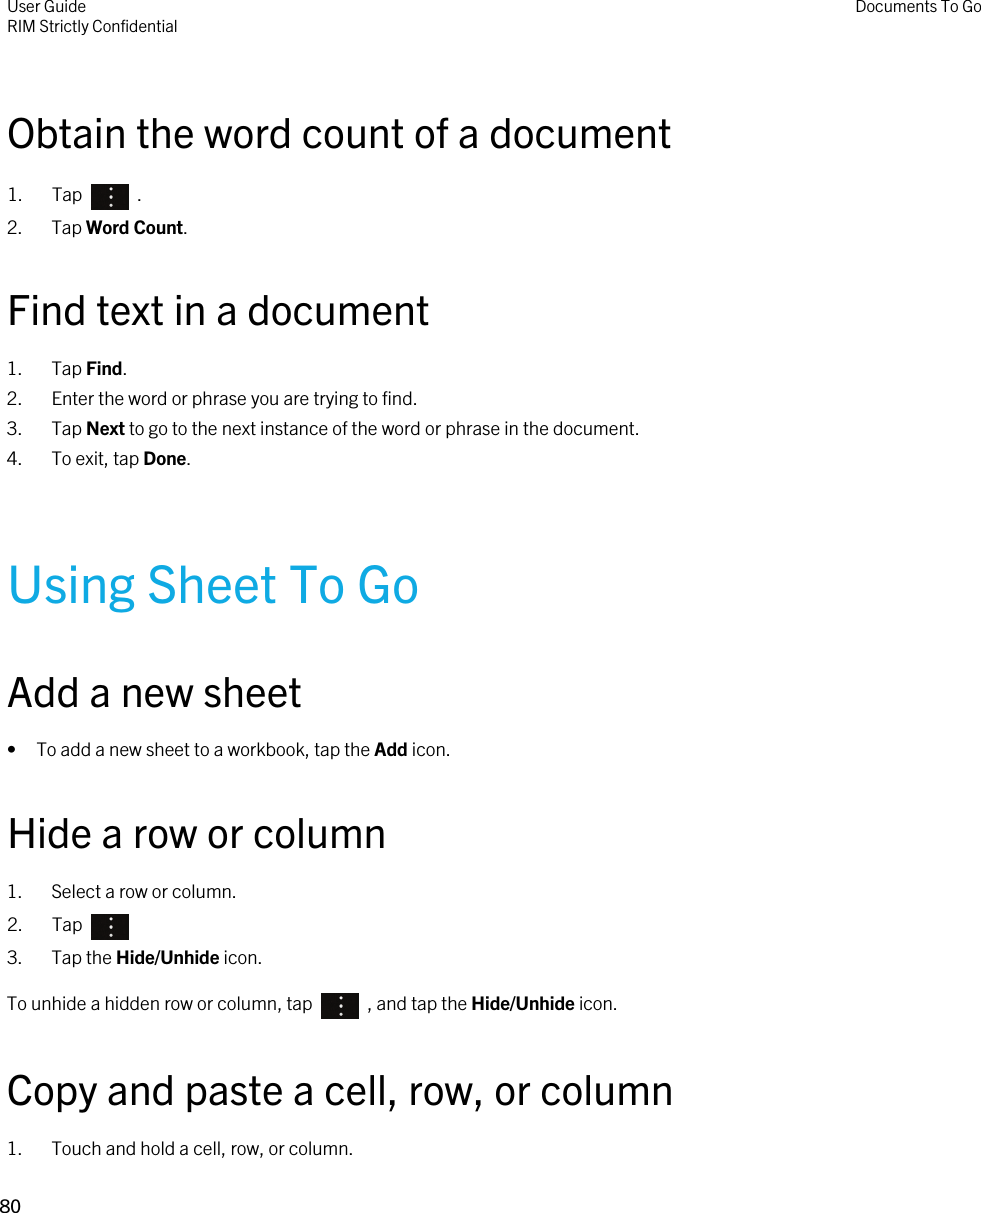 Obtain the word count of a document1.  Tap    .2. Tap Word Count.Find text in a document1. Tap Find.2. Enter the word or phrase you are trying to find.3. Tap Next to go to the next instance of the word or phrase in the document.4. To exit, tap Done.Using Sheet To GoAdd a new sheet• To add a new sheet to a workbook, tap the Add icon.Hide a row or column1. Select a row or column.2.  Tap 3. Tap the Hide/Unhide icon.To unhide a hidden row or column, tap    , and tap the Hide/Unhide icon.Copy and paste a cell, row, or column1. Touch and hold a cell, row, or column.User GuideRIM Strictly ConfidentialDocuments To Go80 